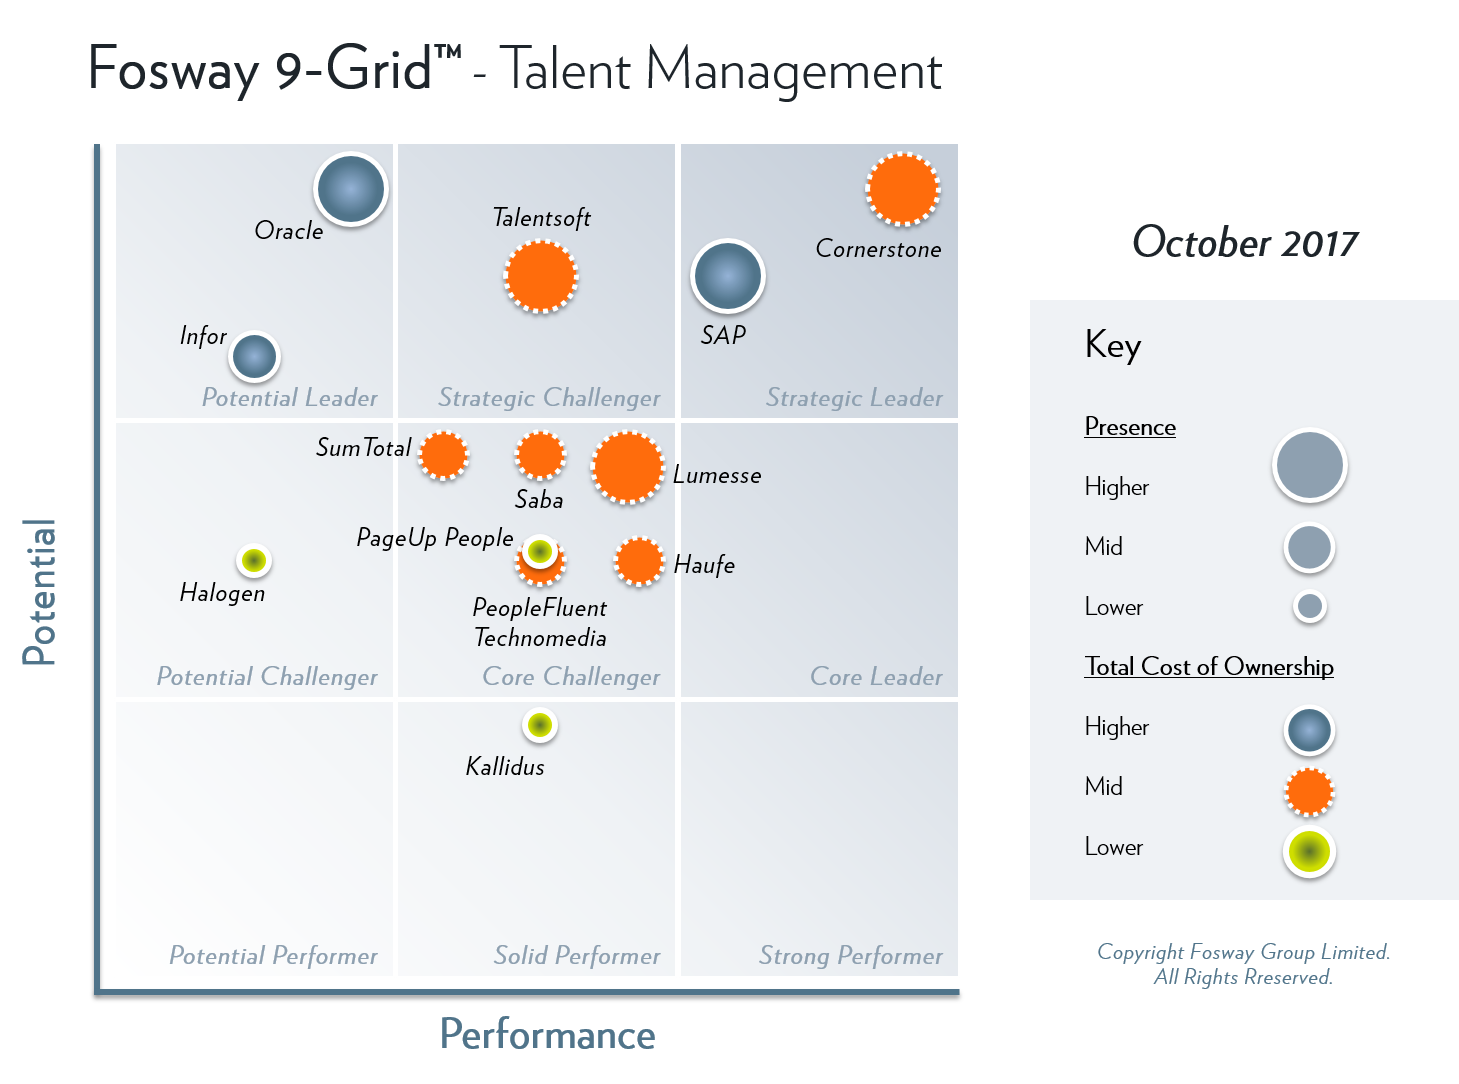 Fosway 9-Grid - Integrated Talent Management 2017